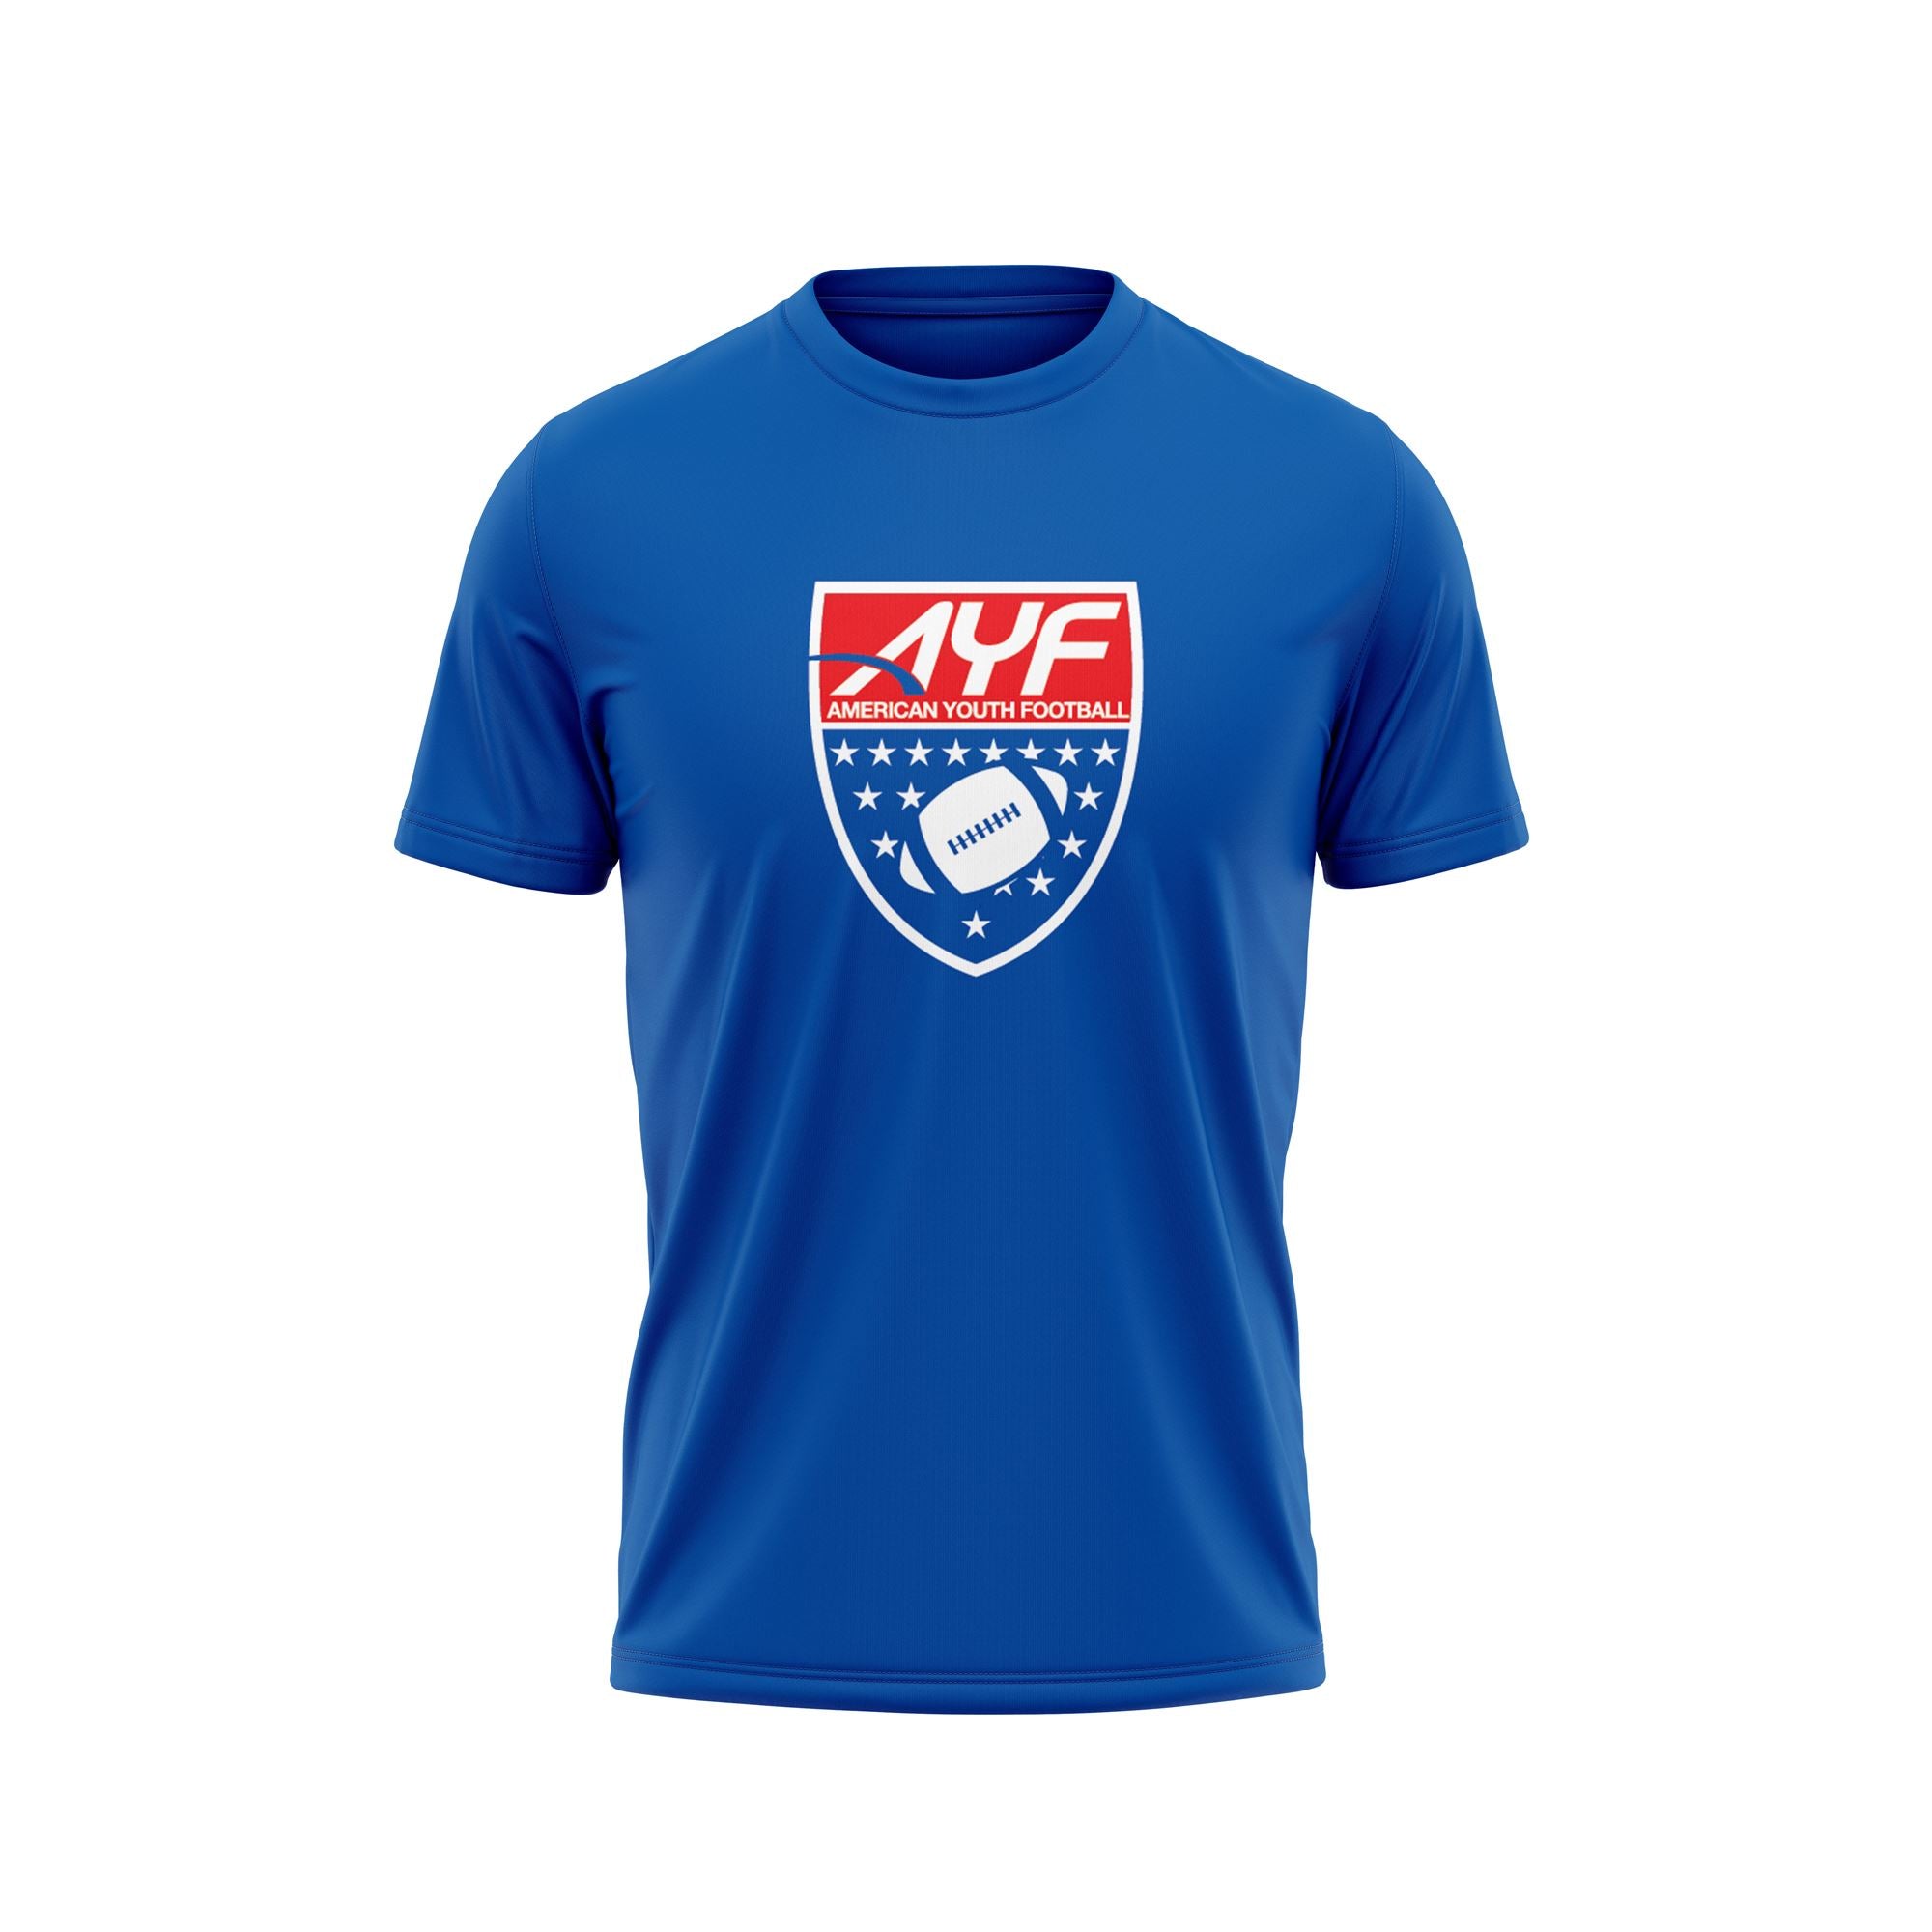 AYF Full Dye Sublimated Short Sleeve Crew Neck (6 Colors)